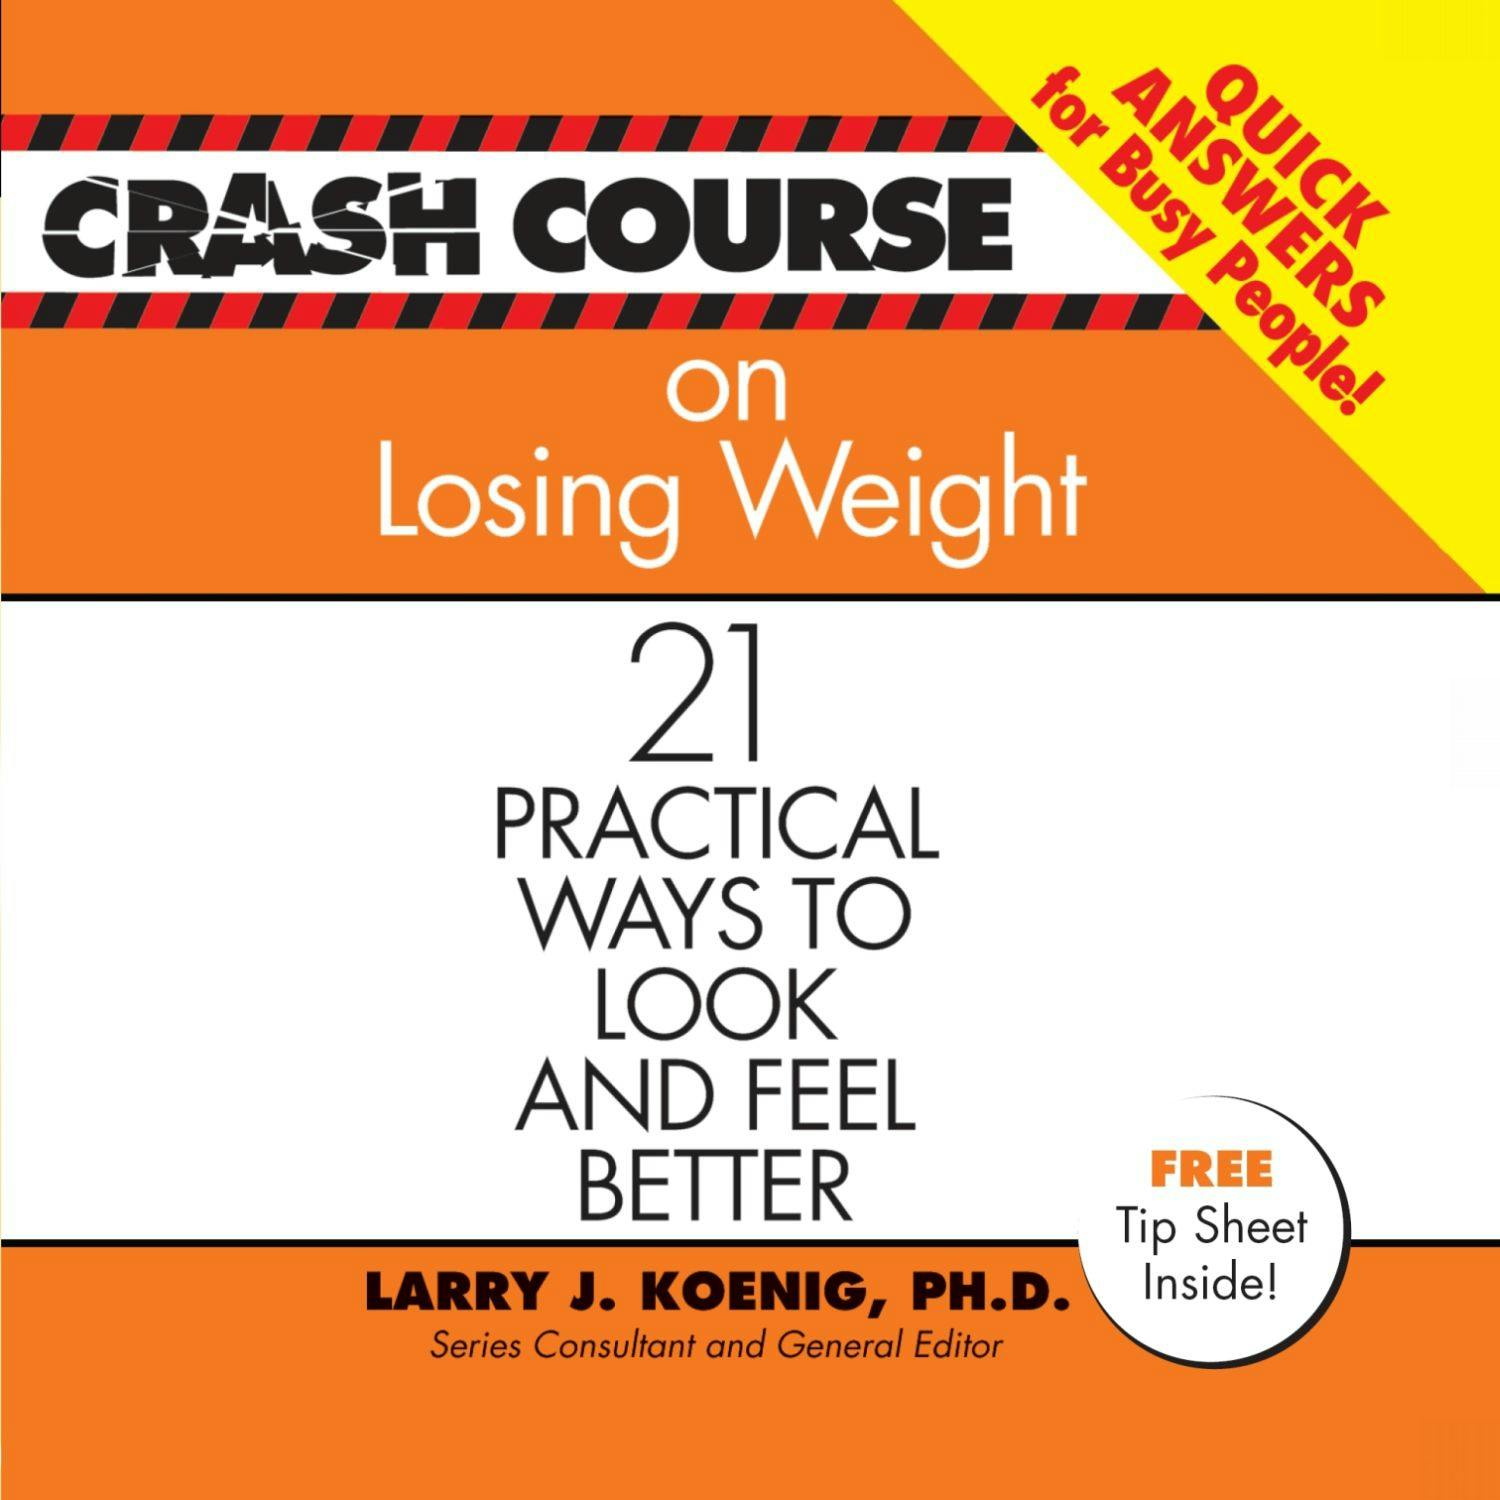 Crash Course on Losing Weight: 21 Practical Ways to Look and Feel Better - Larry J Koenig